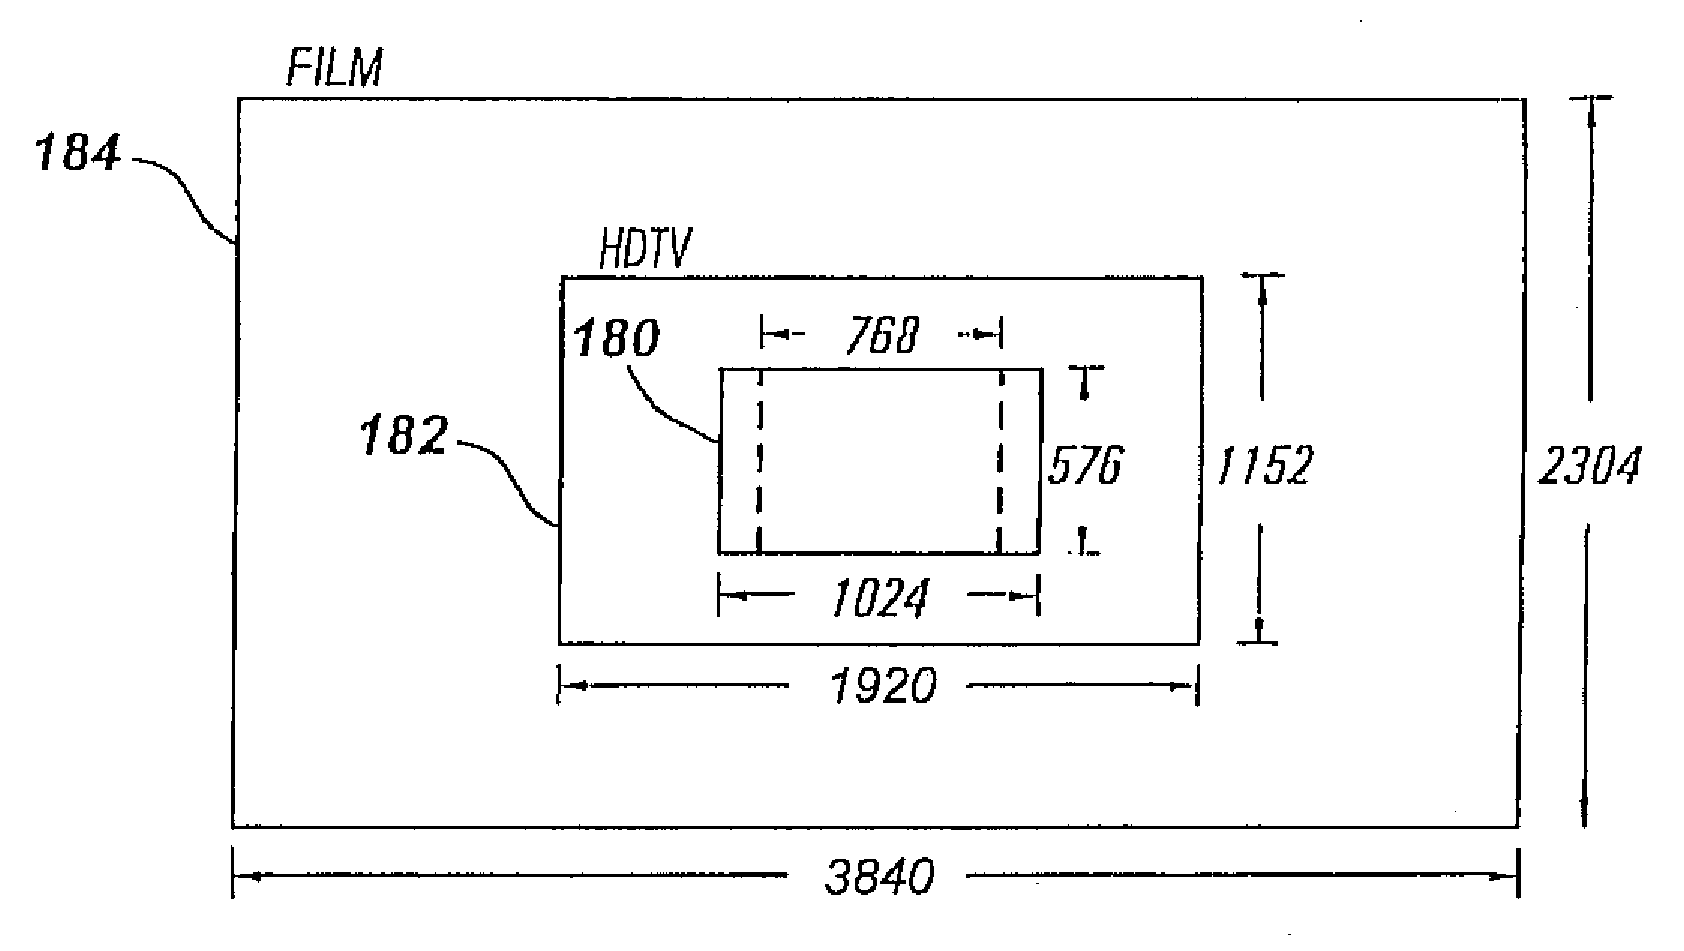 Integrated multi-format audio/video production system